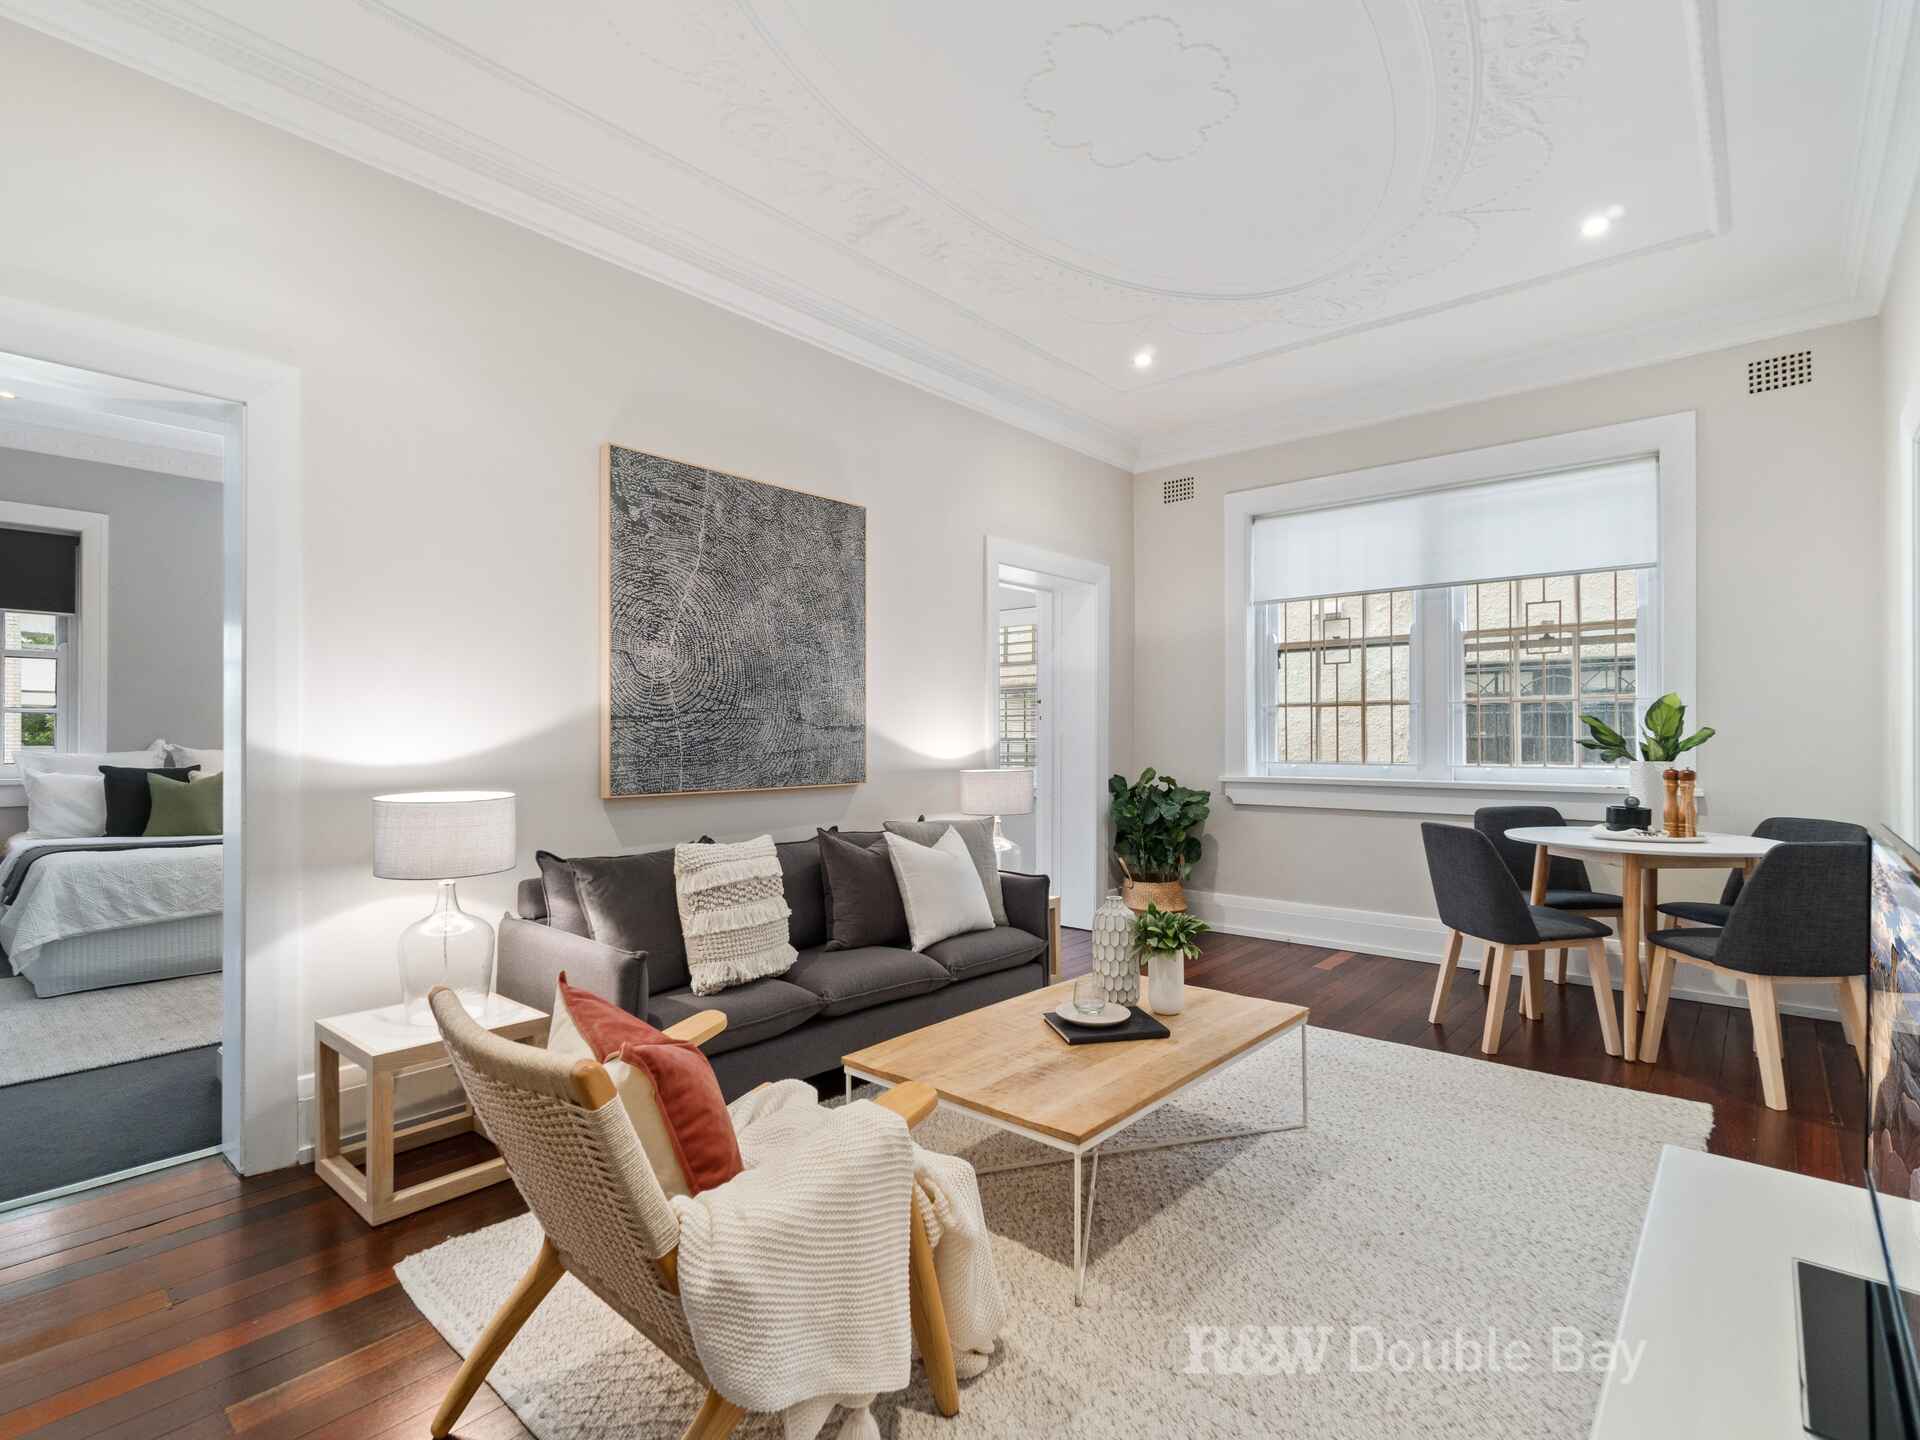 2/11 Manning Road Double Bay